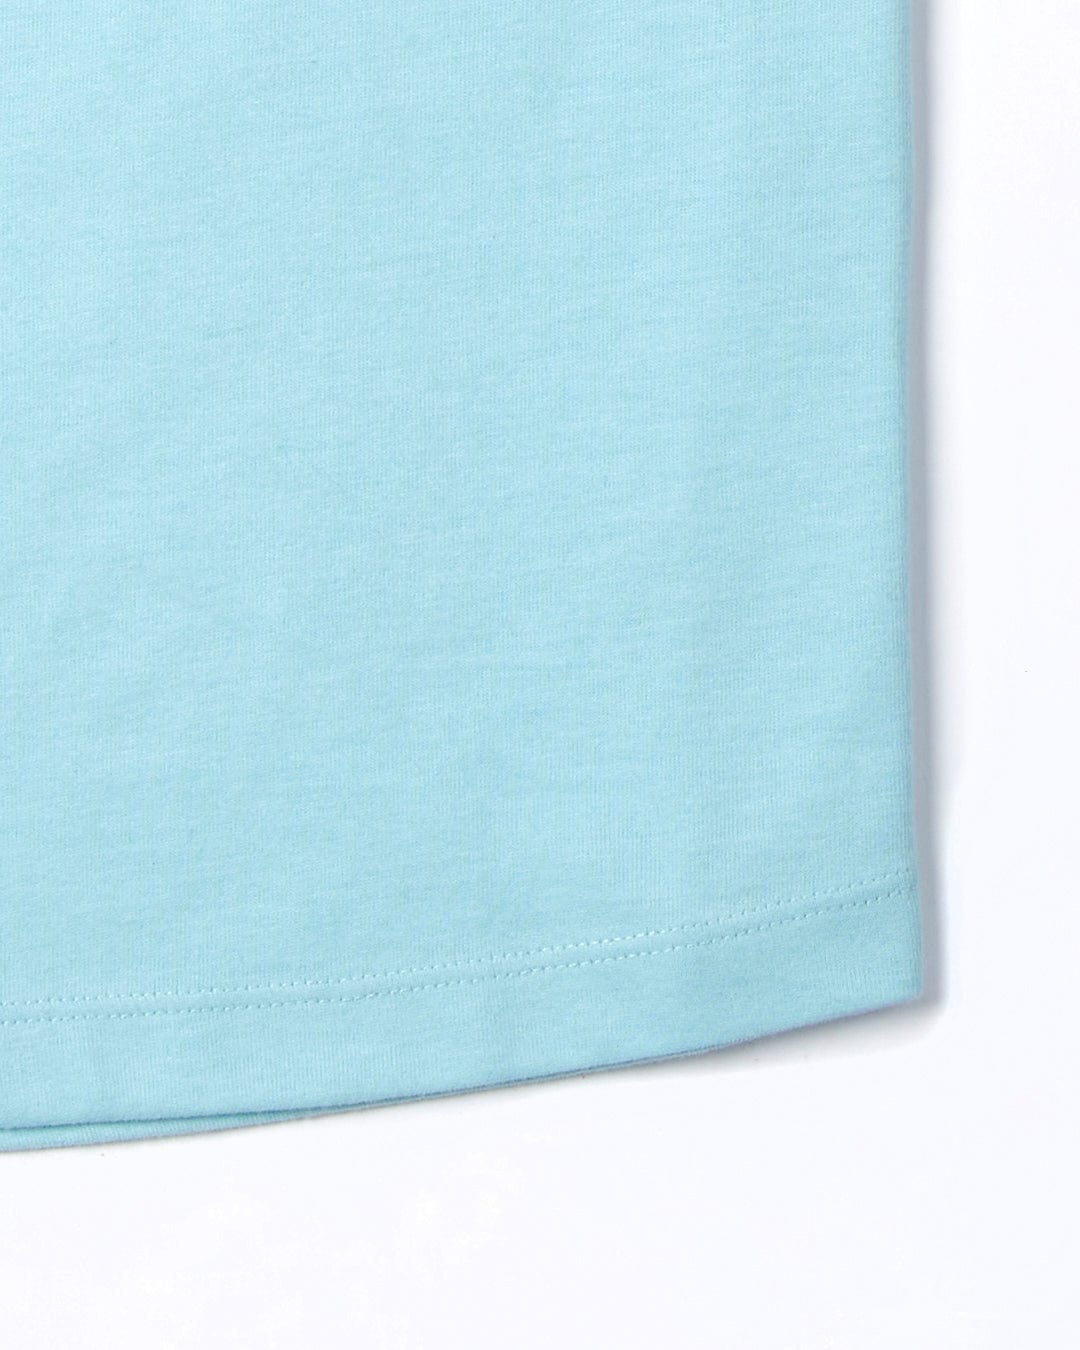 Close-up of a Velator - Womens Short Sleeve T-Shirt - Light Blue fabric texture with a visible hem stitch and Saltrock branding on a white background.